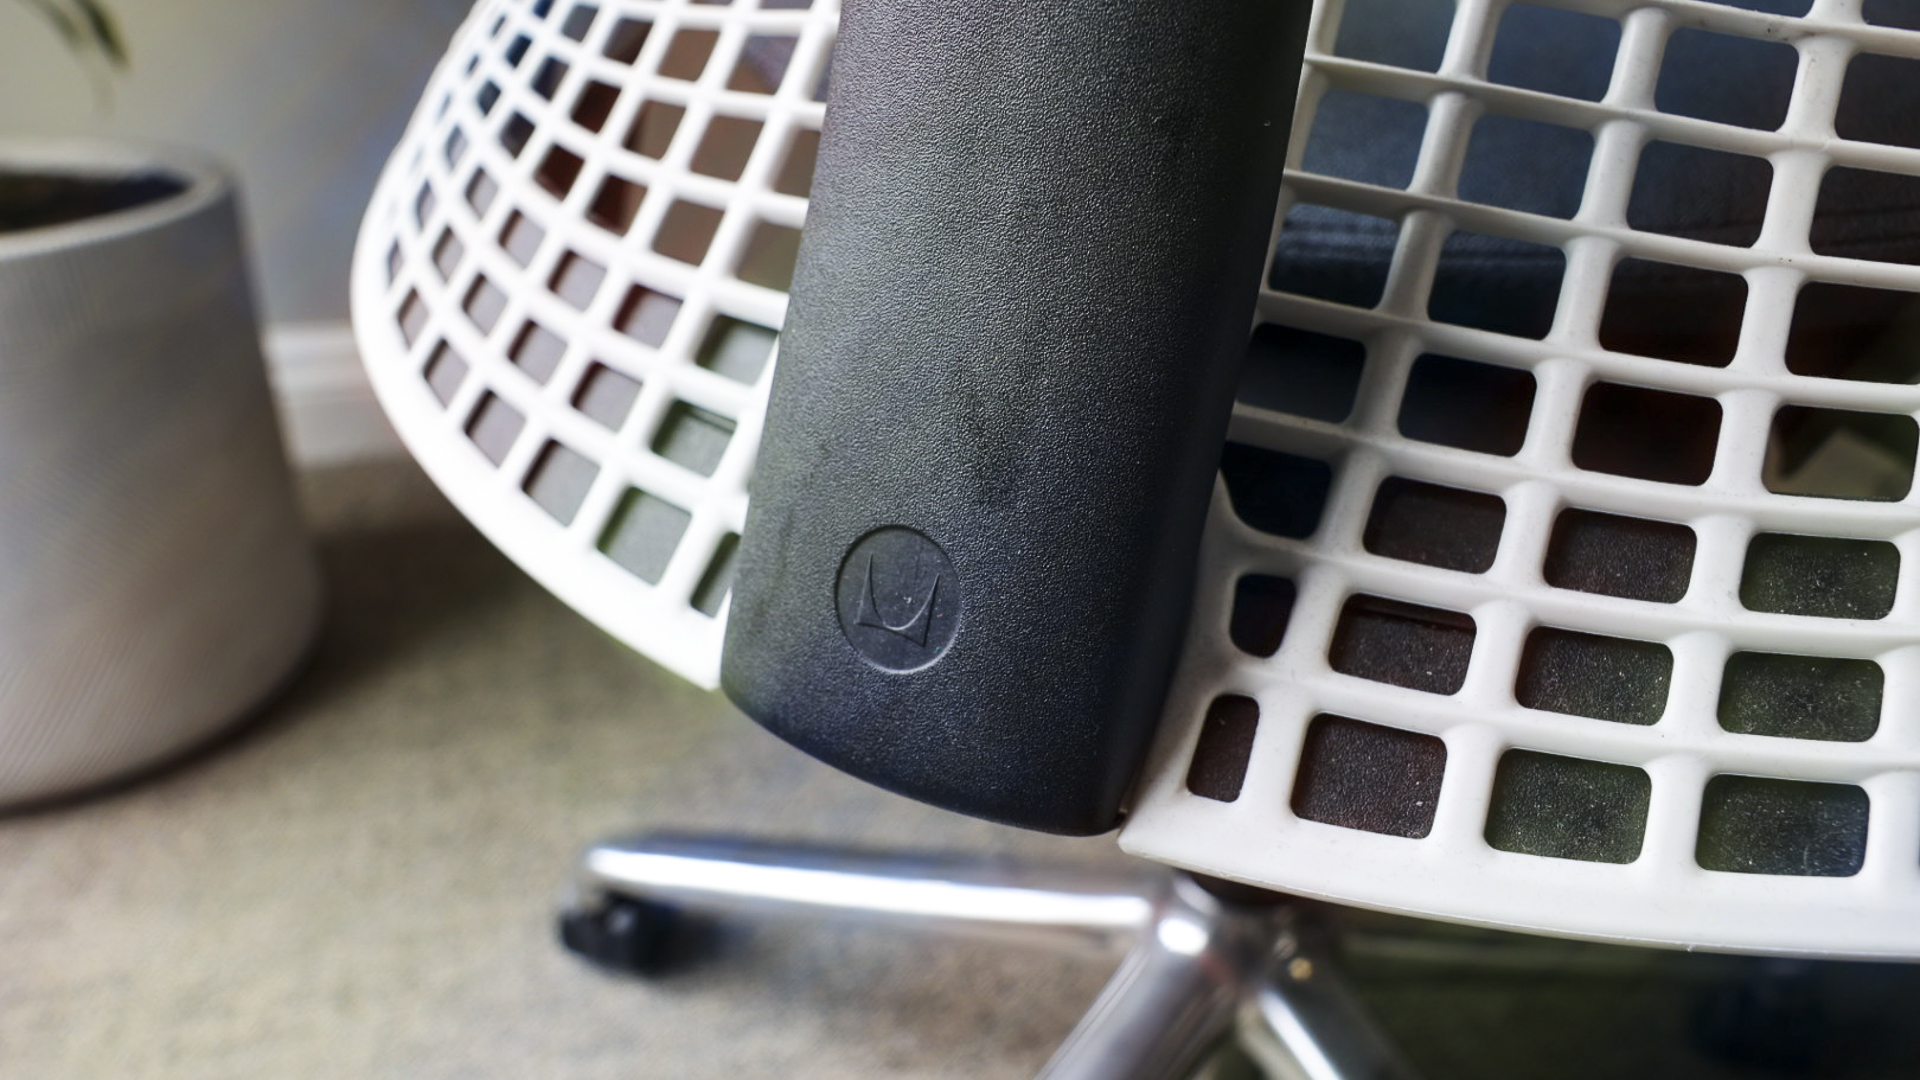 The back of the Herman Miller Sayl office chair